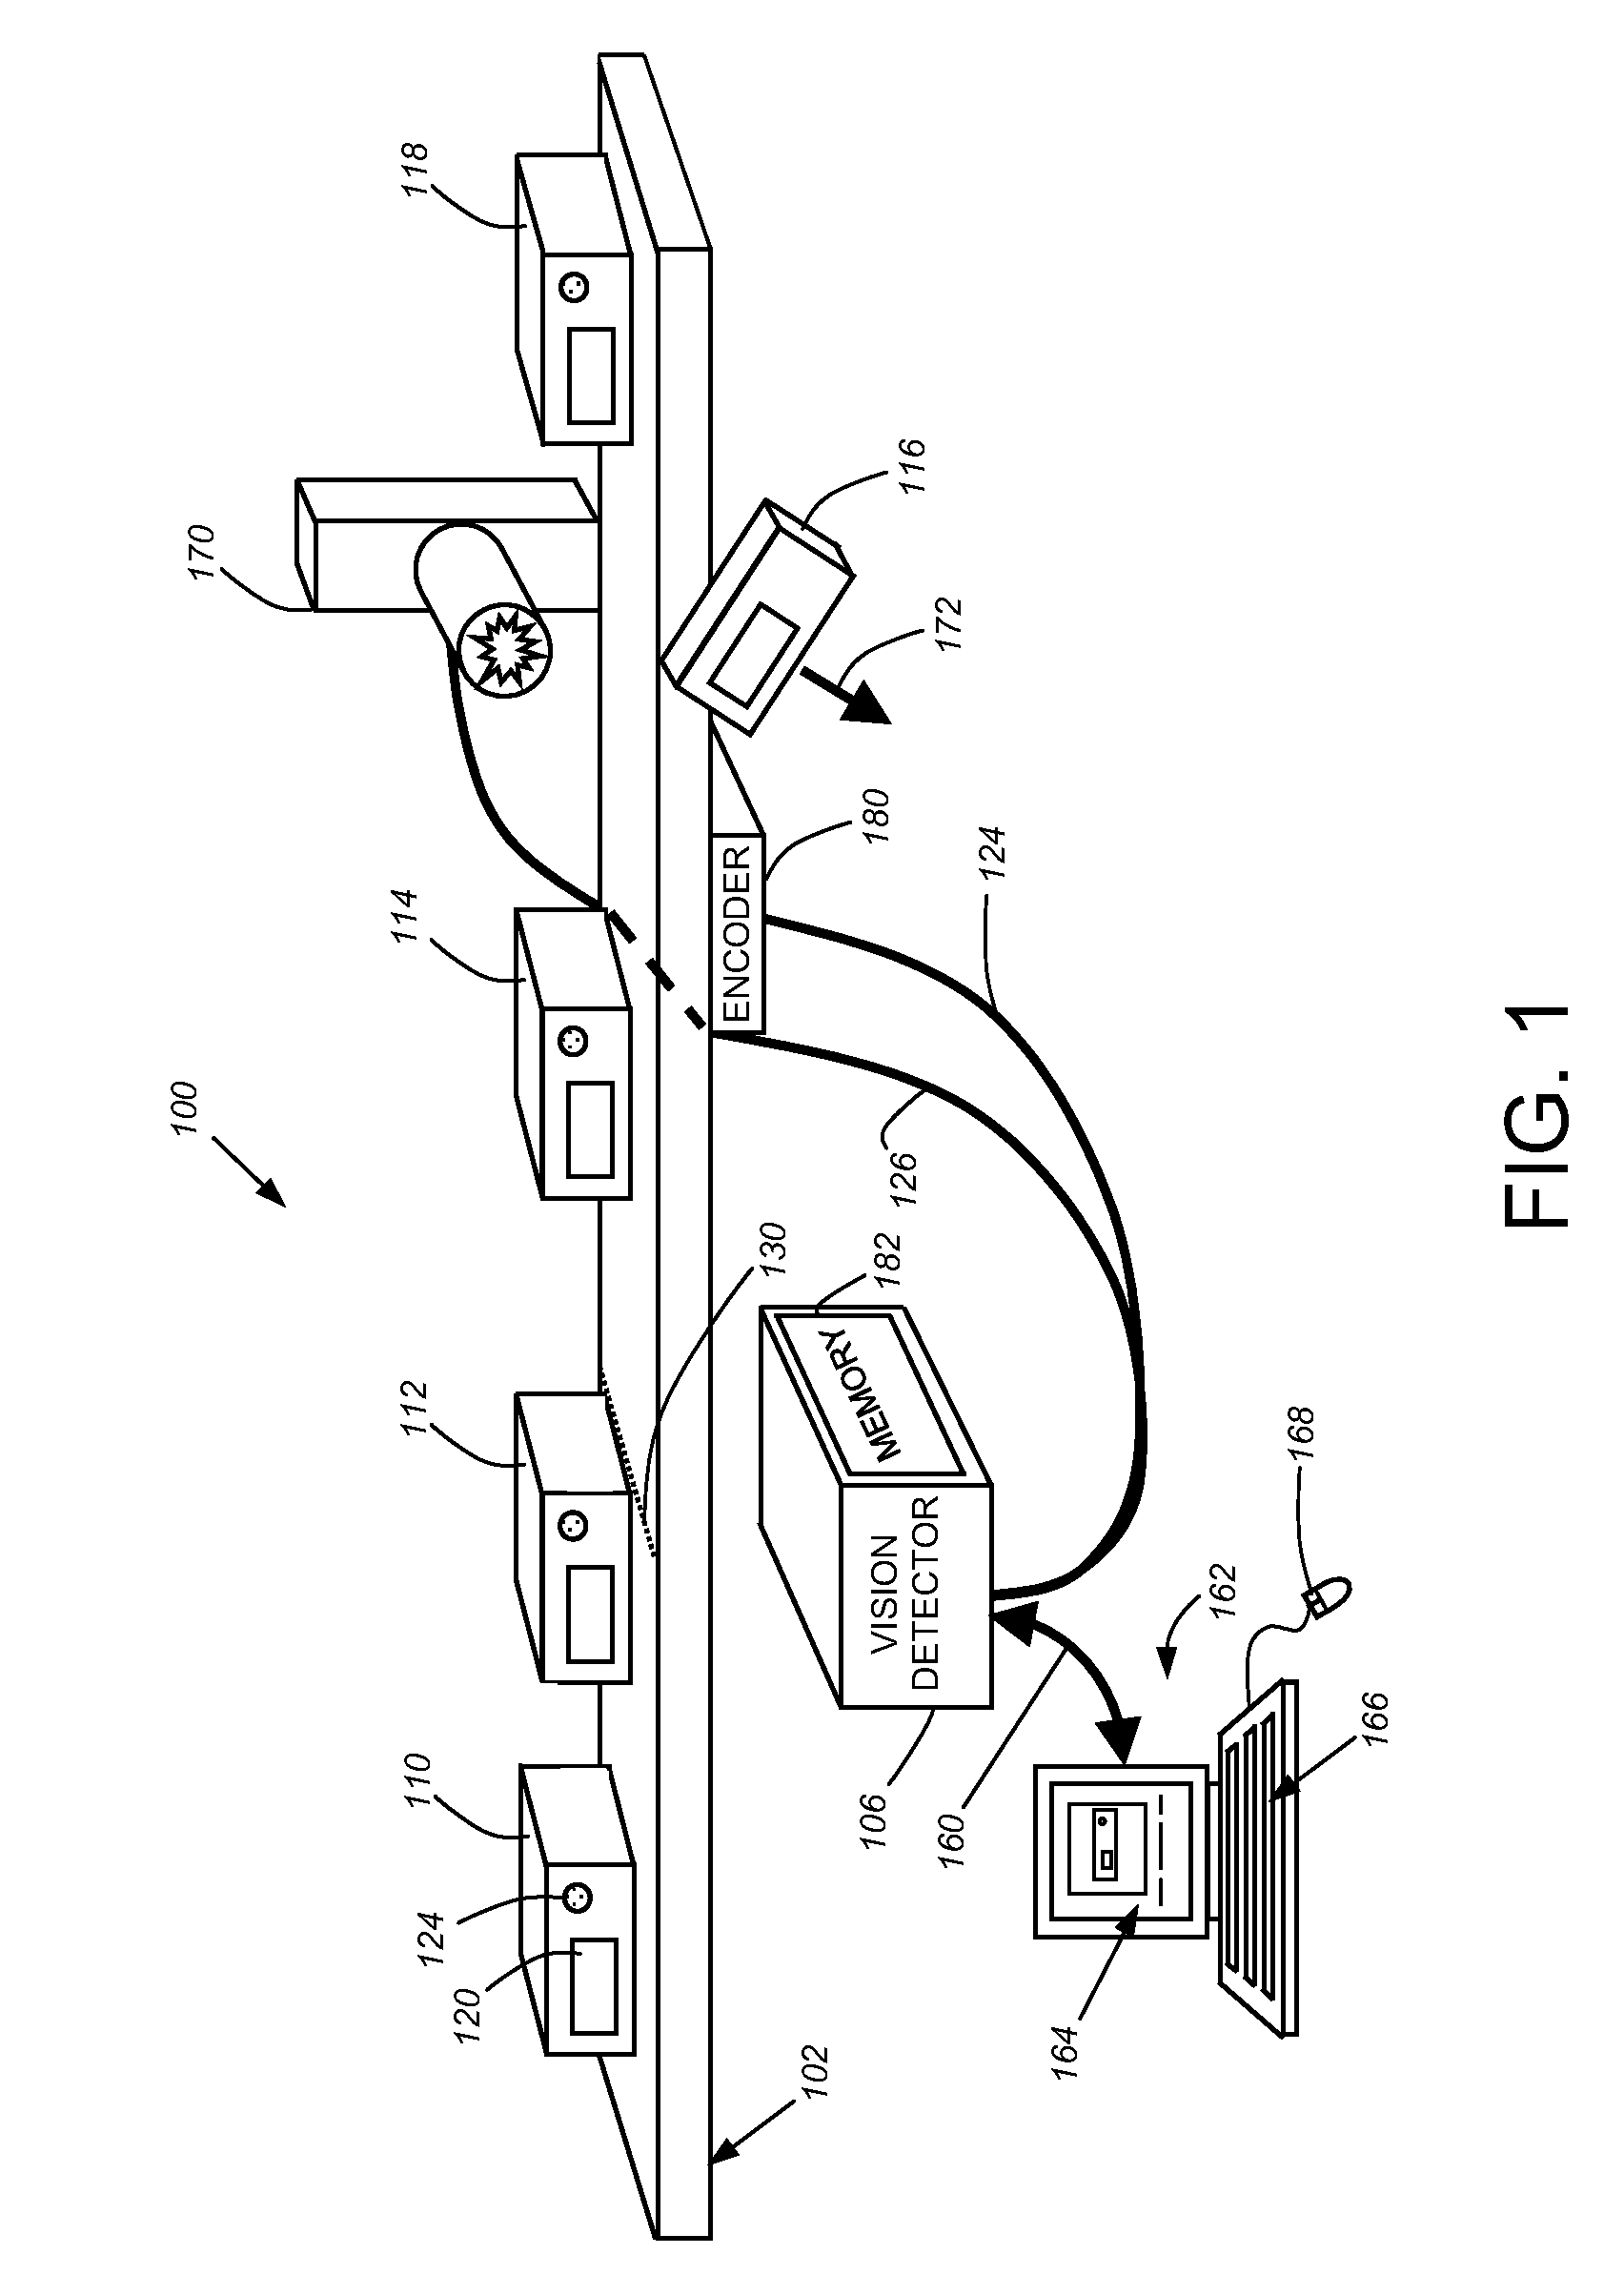 Human-machine-interface and method for manipulating data in a machine vision system